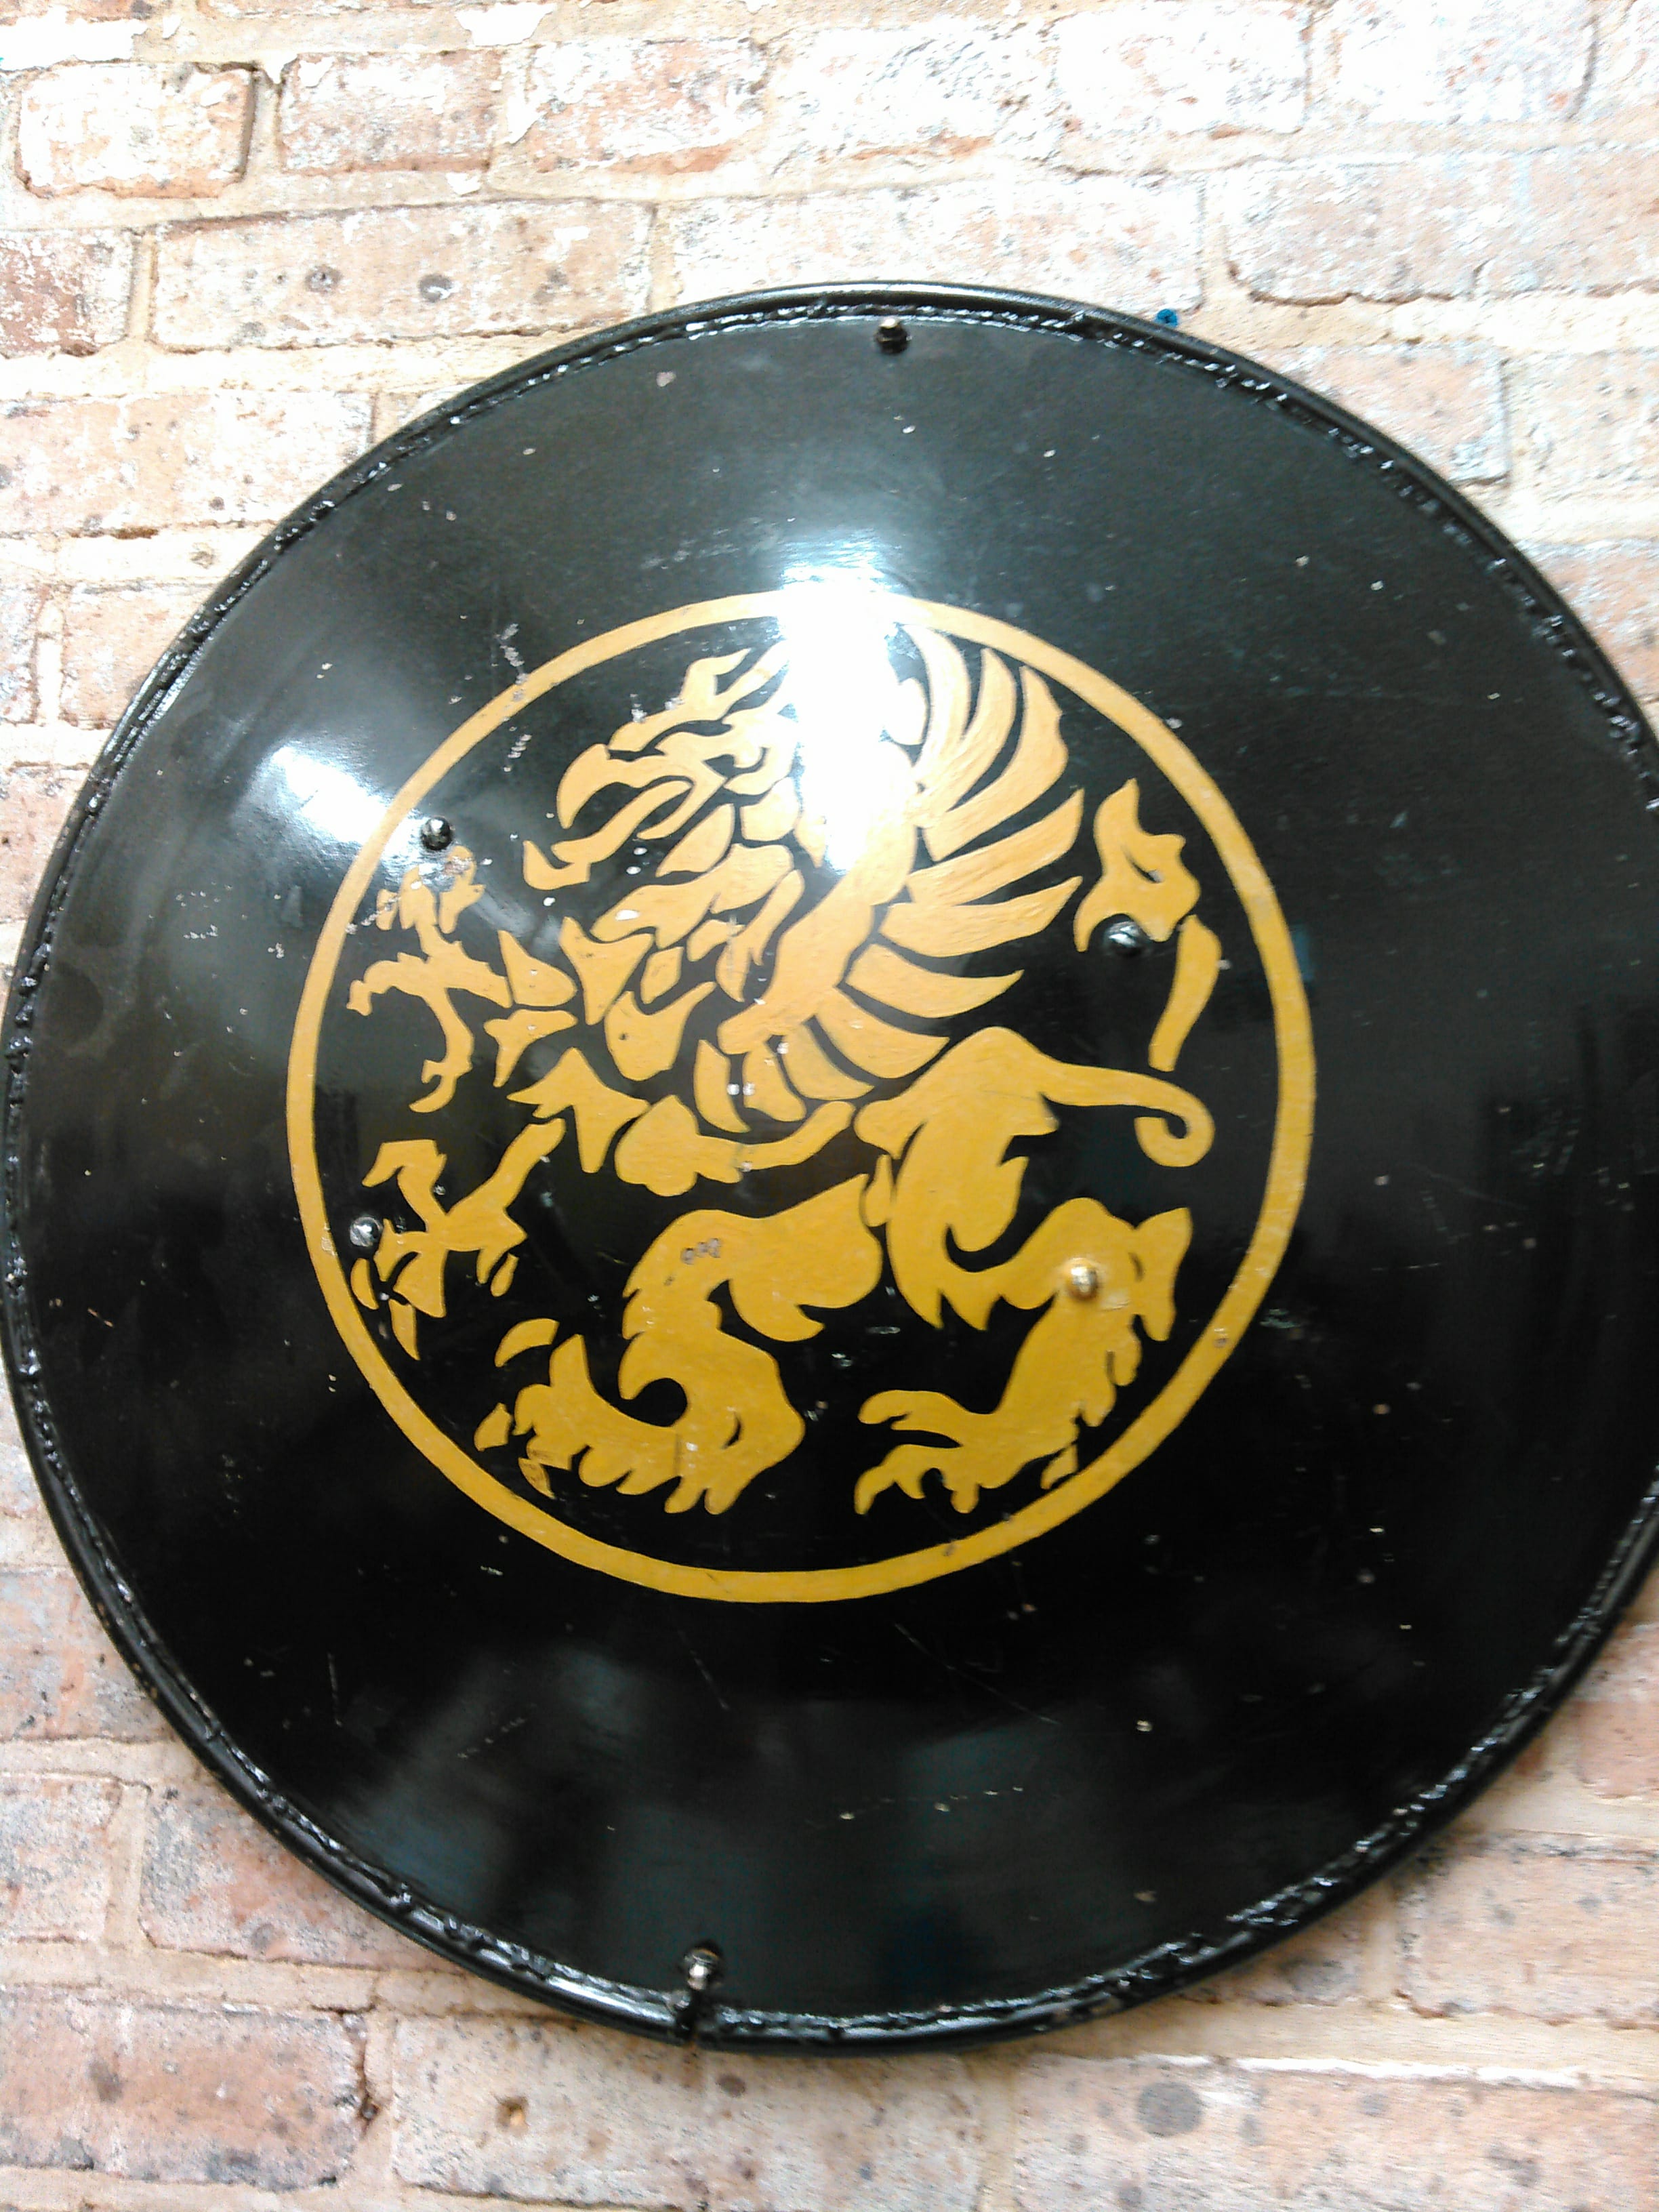 photograph of Gordon Rede's round shield